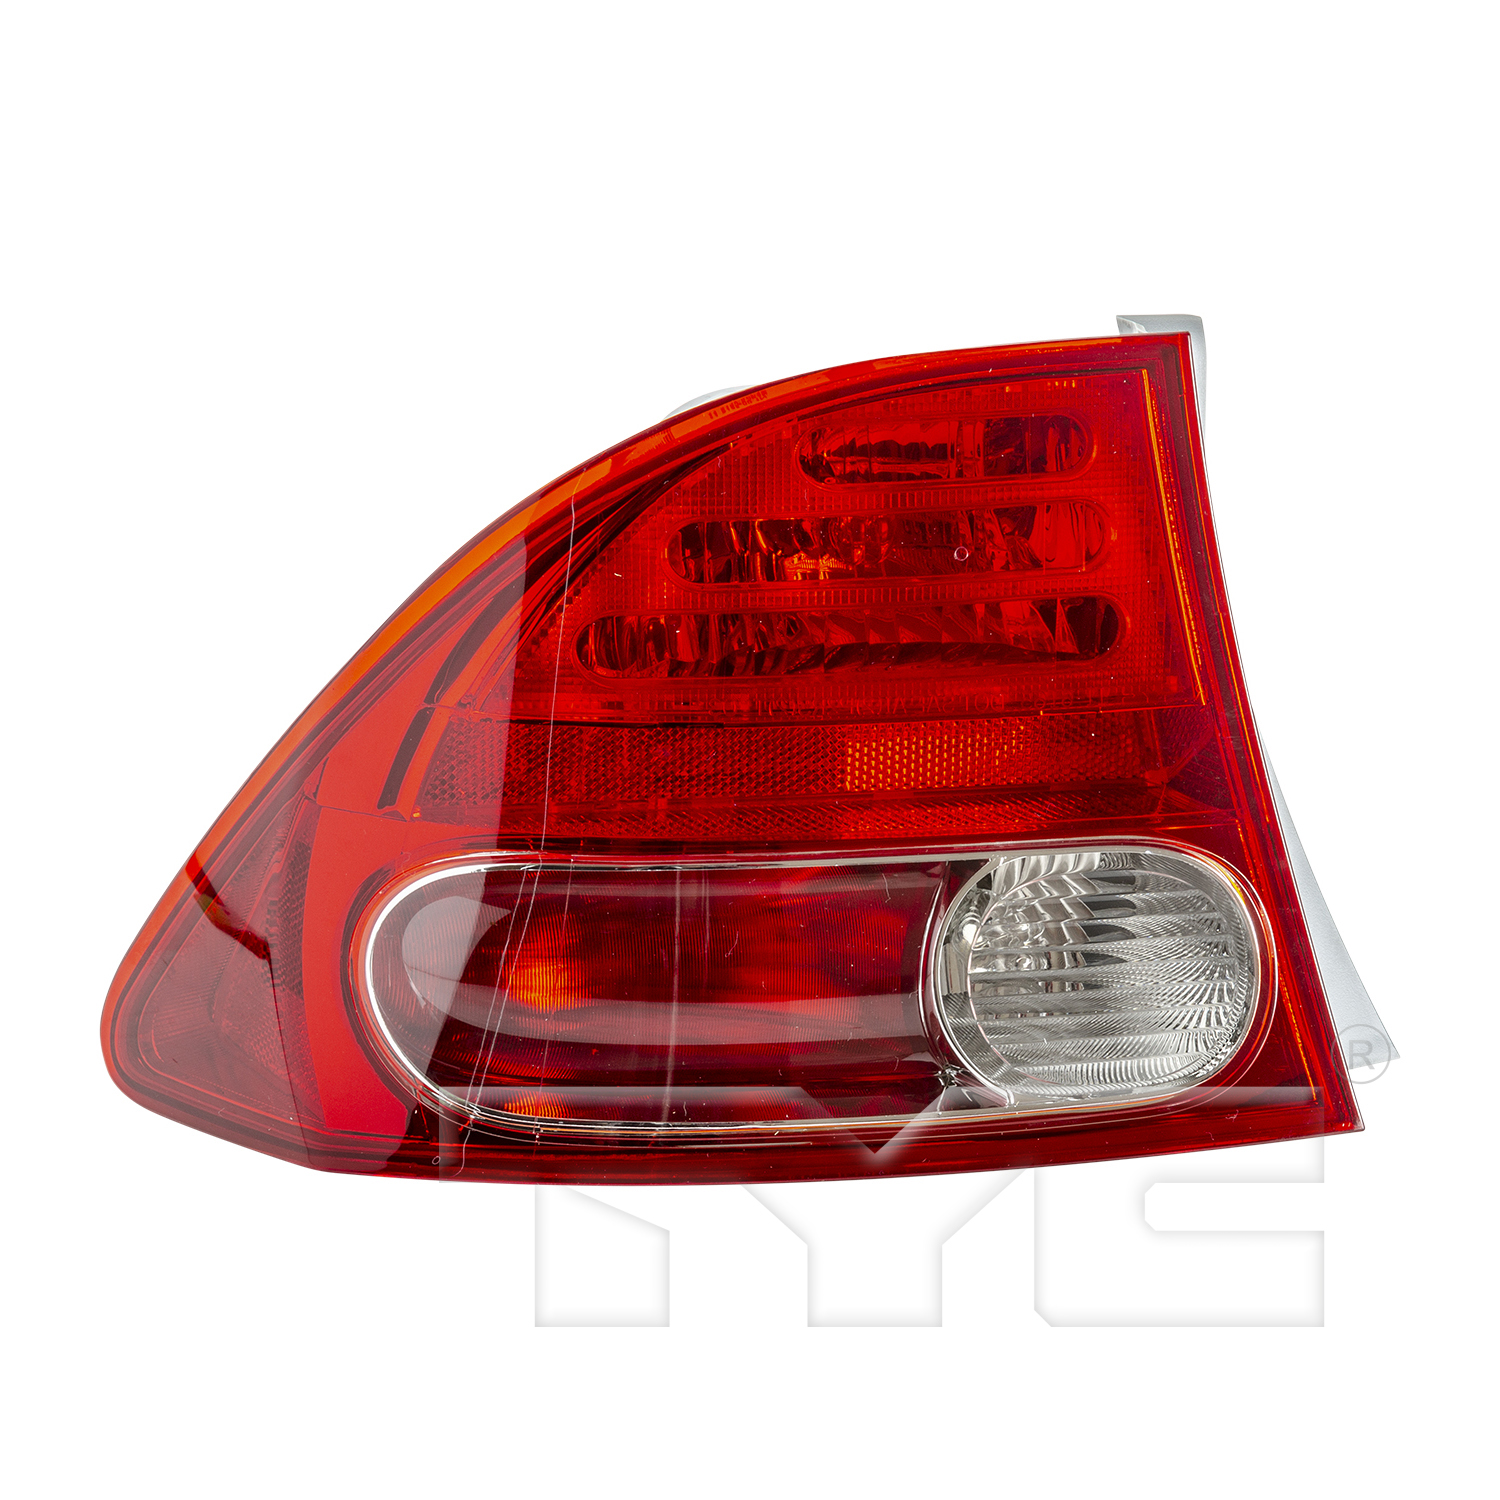 Aftermarket TAILLIGHTS for HONDA - CIVIC, CIVIC,06-08,LT Taillamp assy